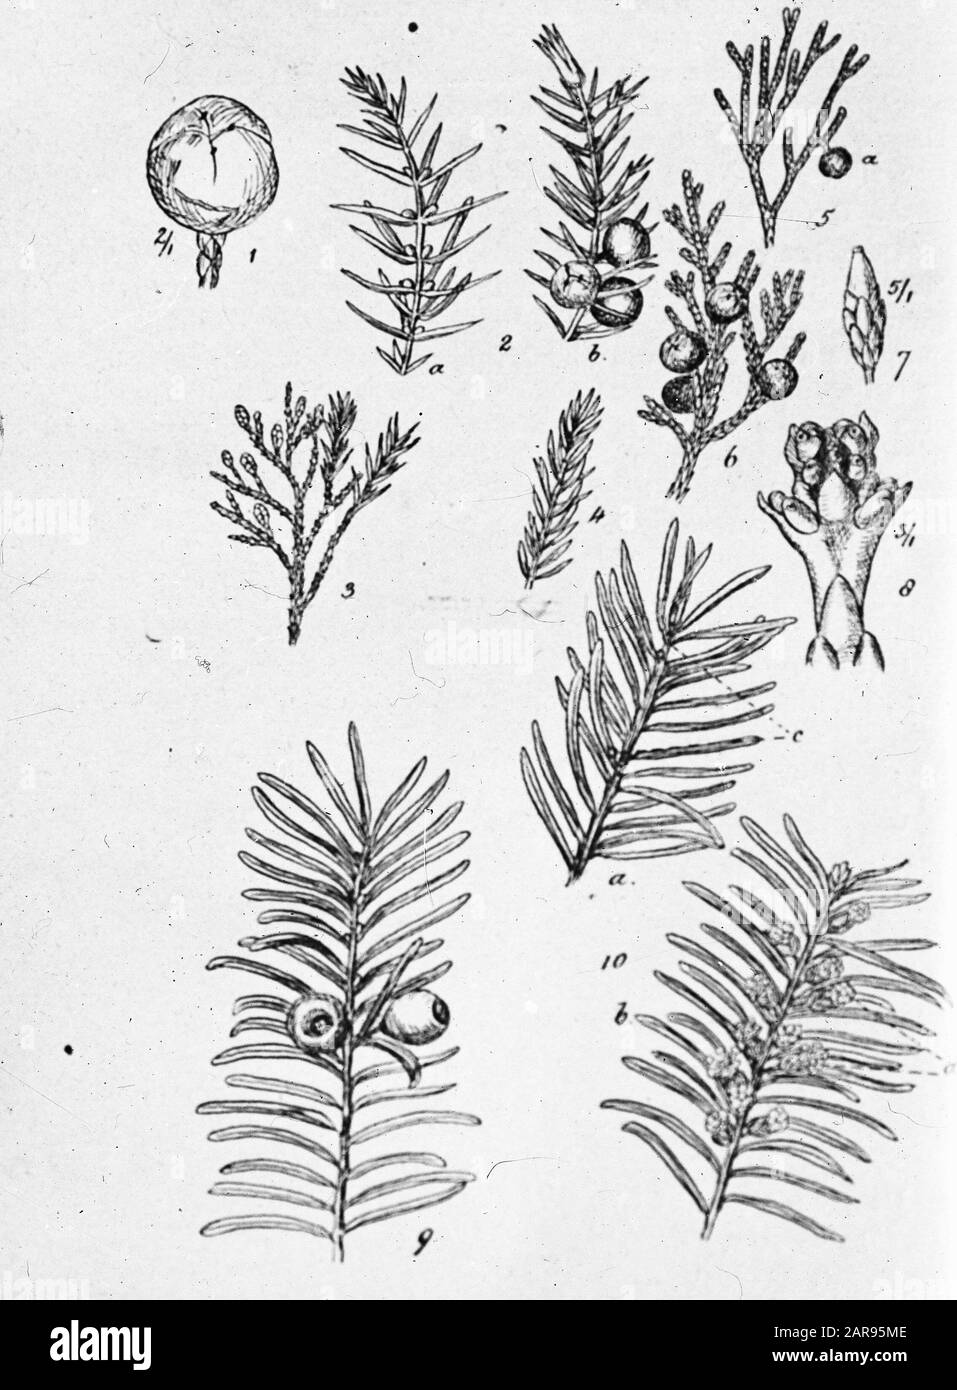 drawing Date: undated Keywords: trees, forests, botanical, avenues, coniferous wood Personal name: cephalotaxus, juniperus, yew Stock Photo